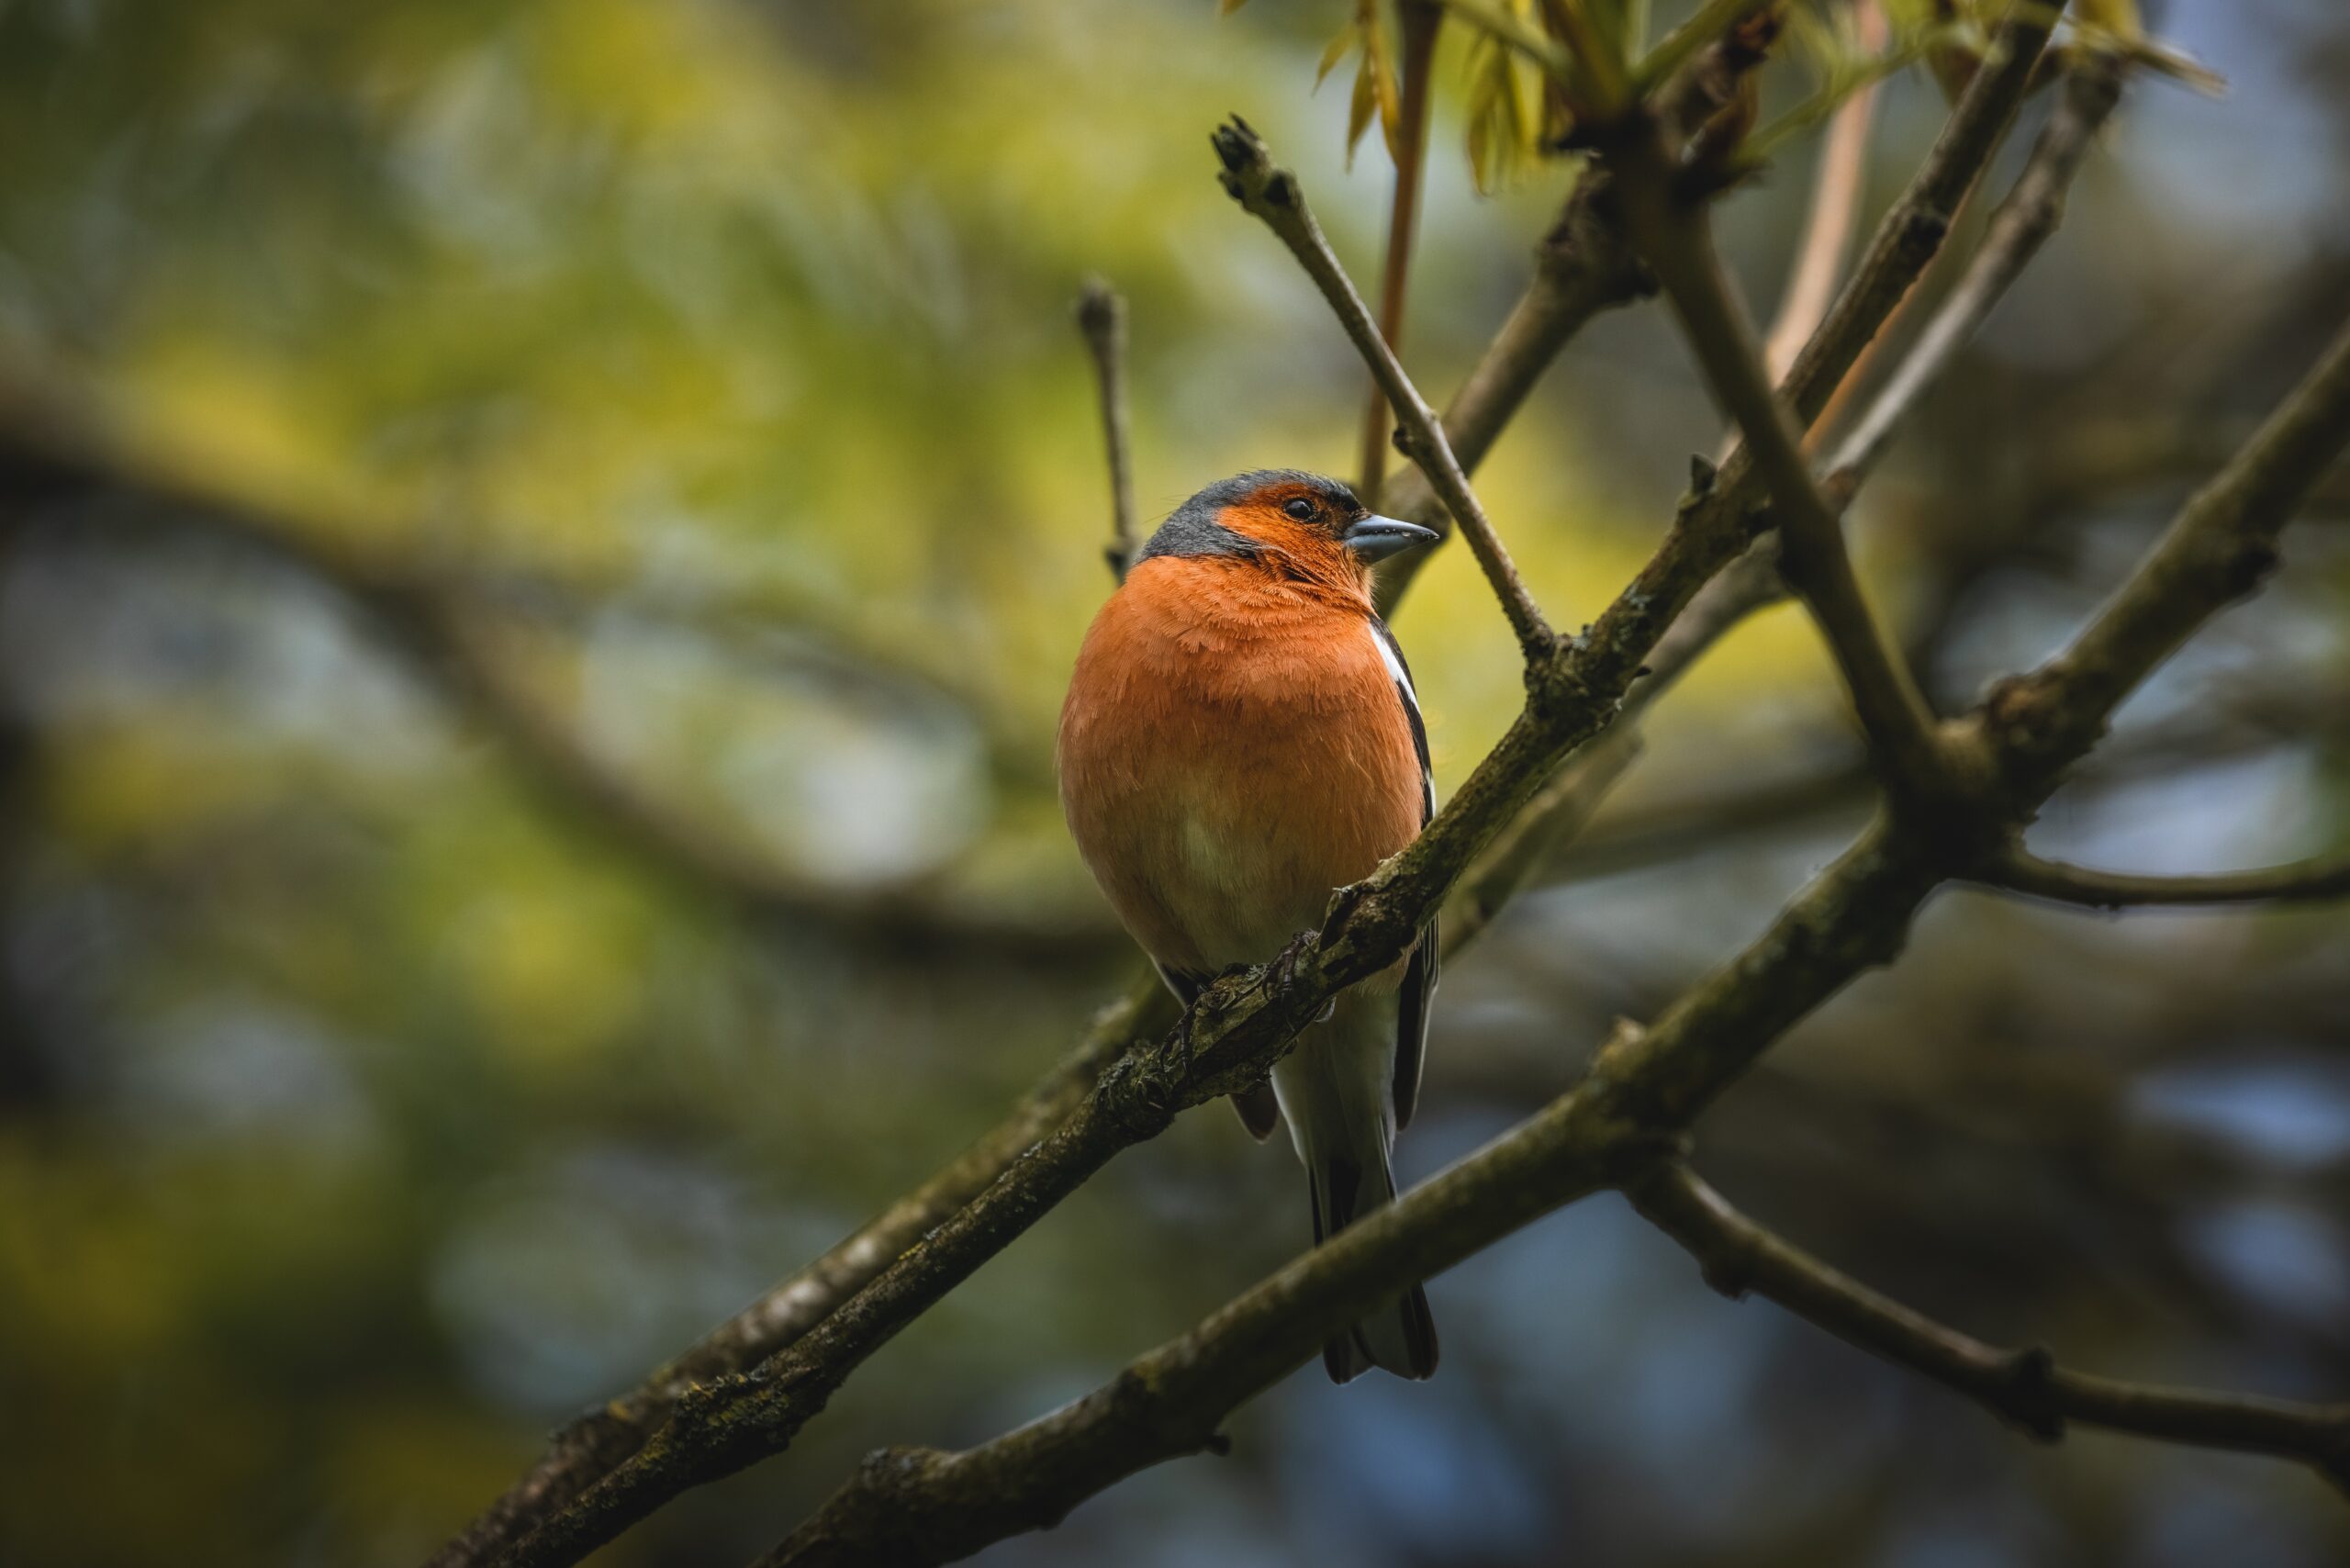 Photo of a bird on tree branches in a forest